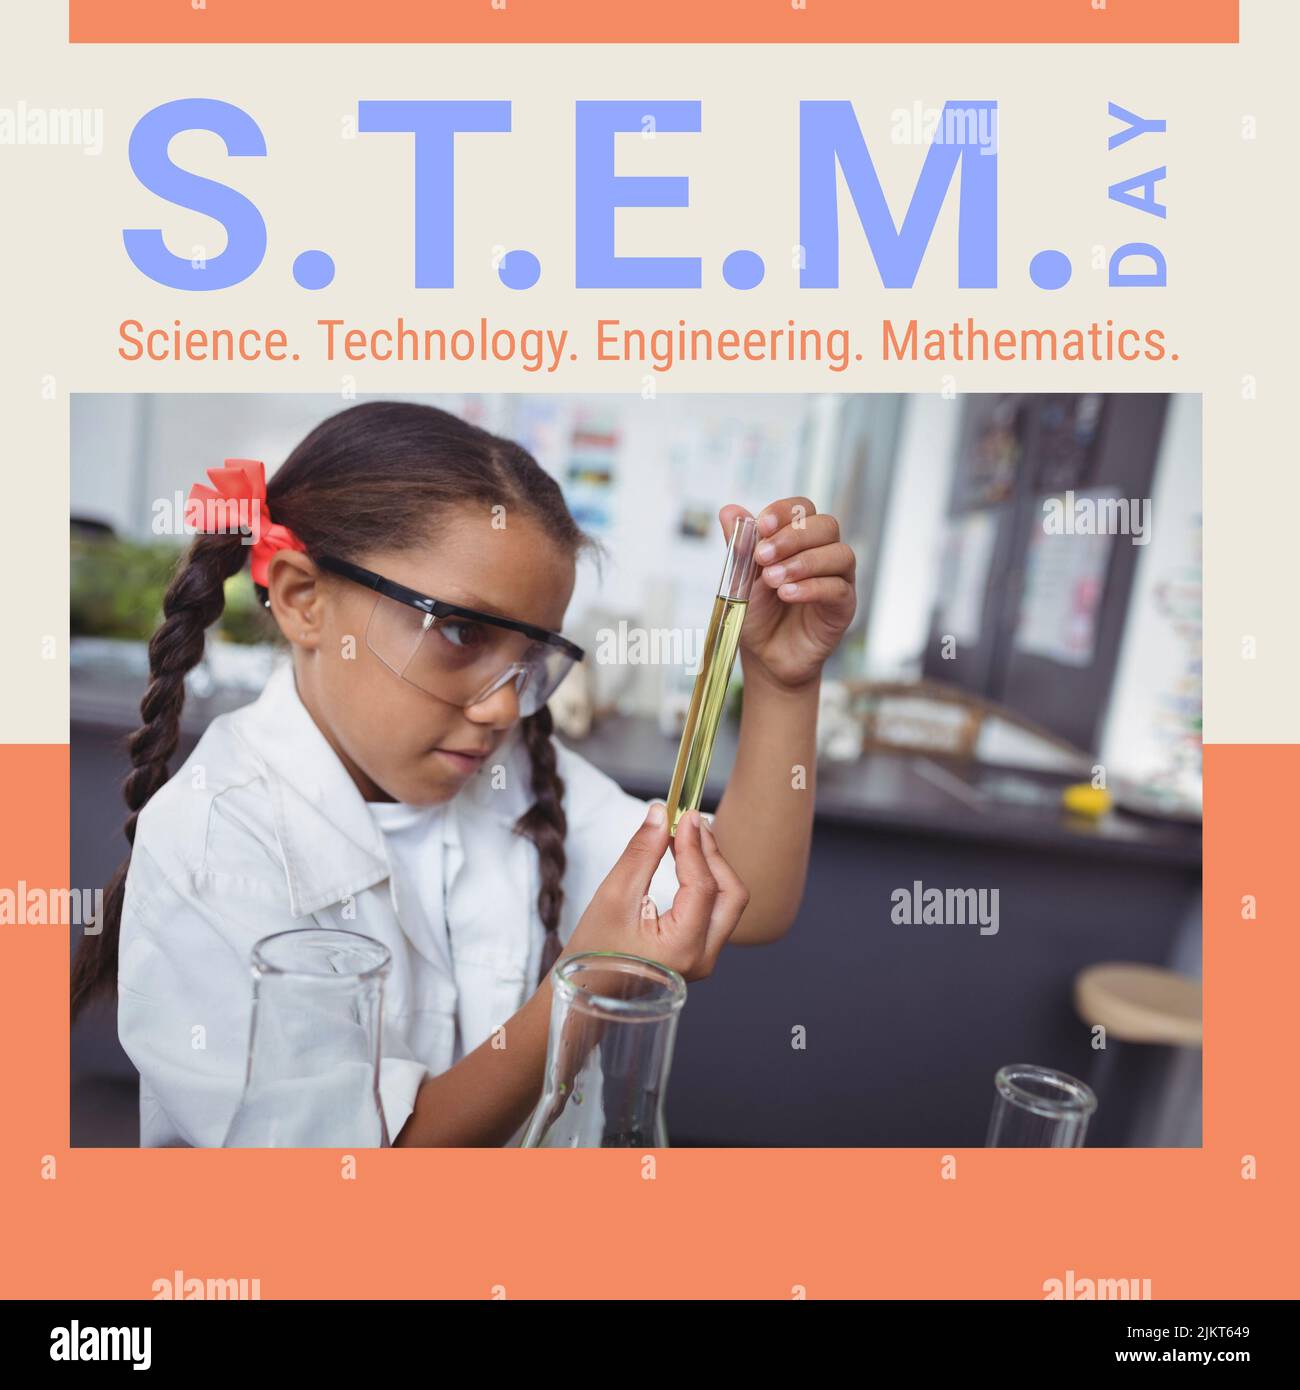 Square image of stem day text with biracial schoolgirl in chemistry class Stock Photo